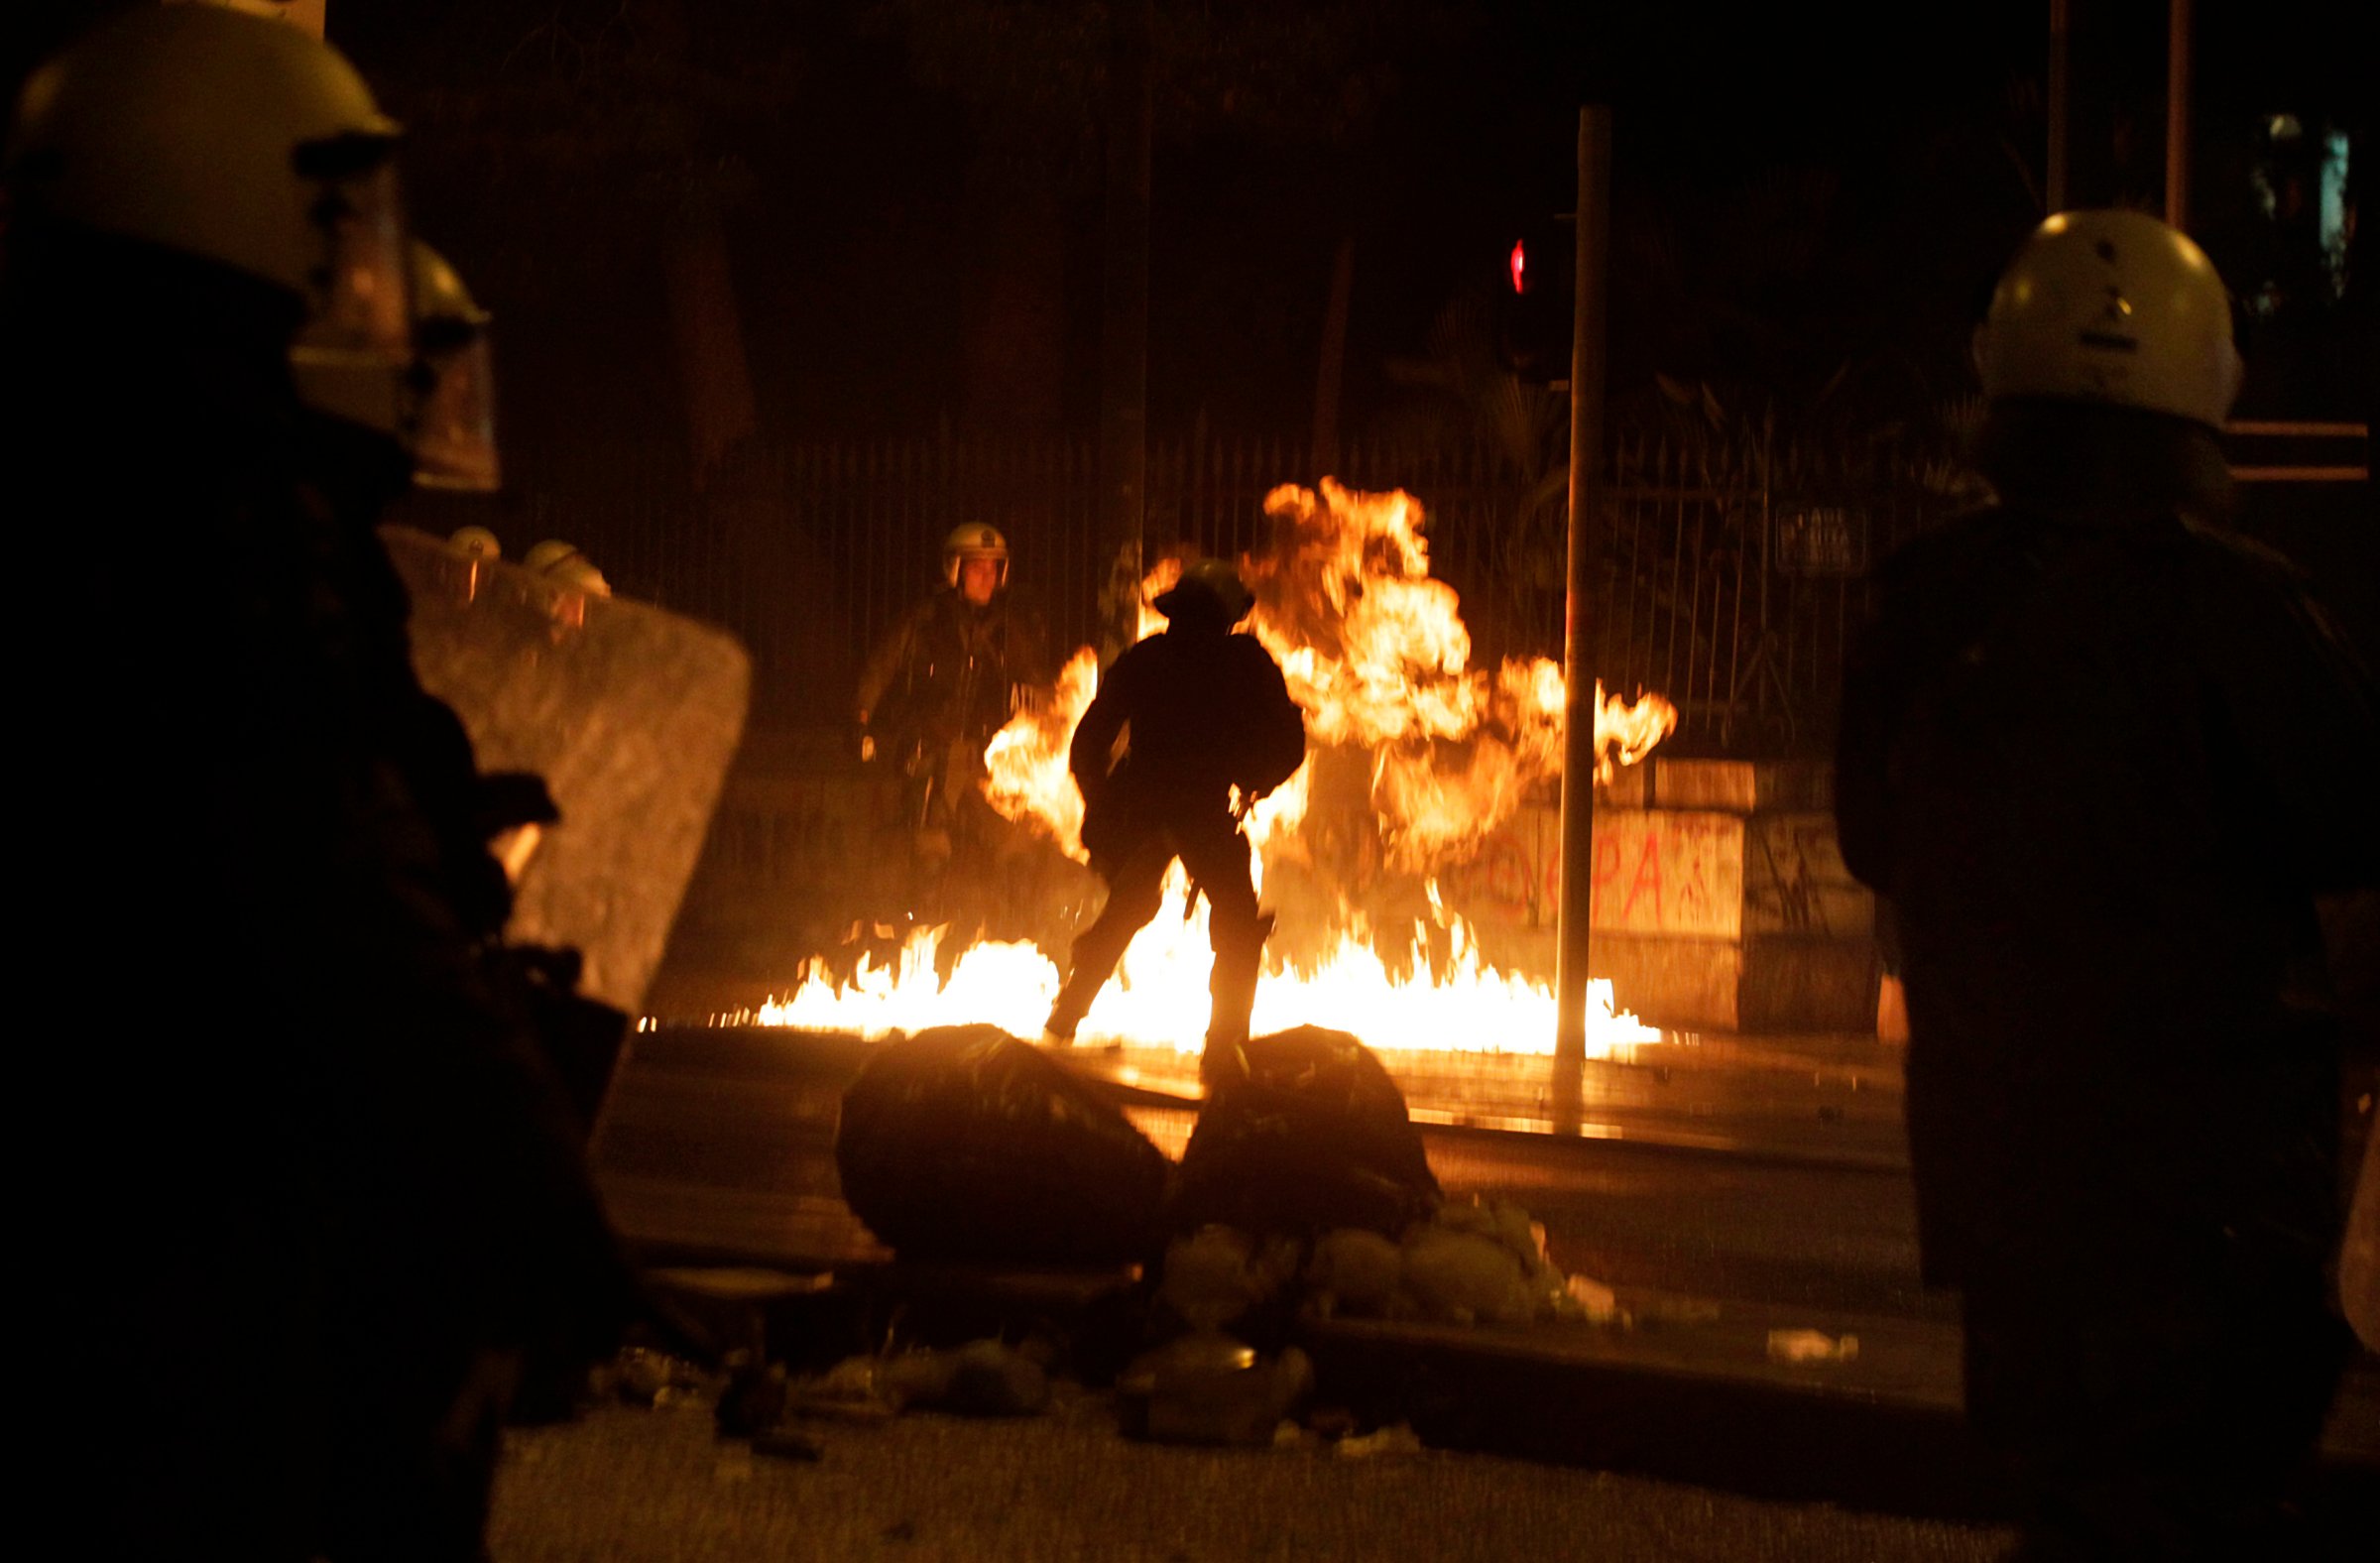 Minor clashes in Athens